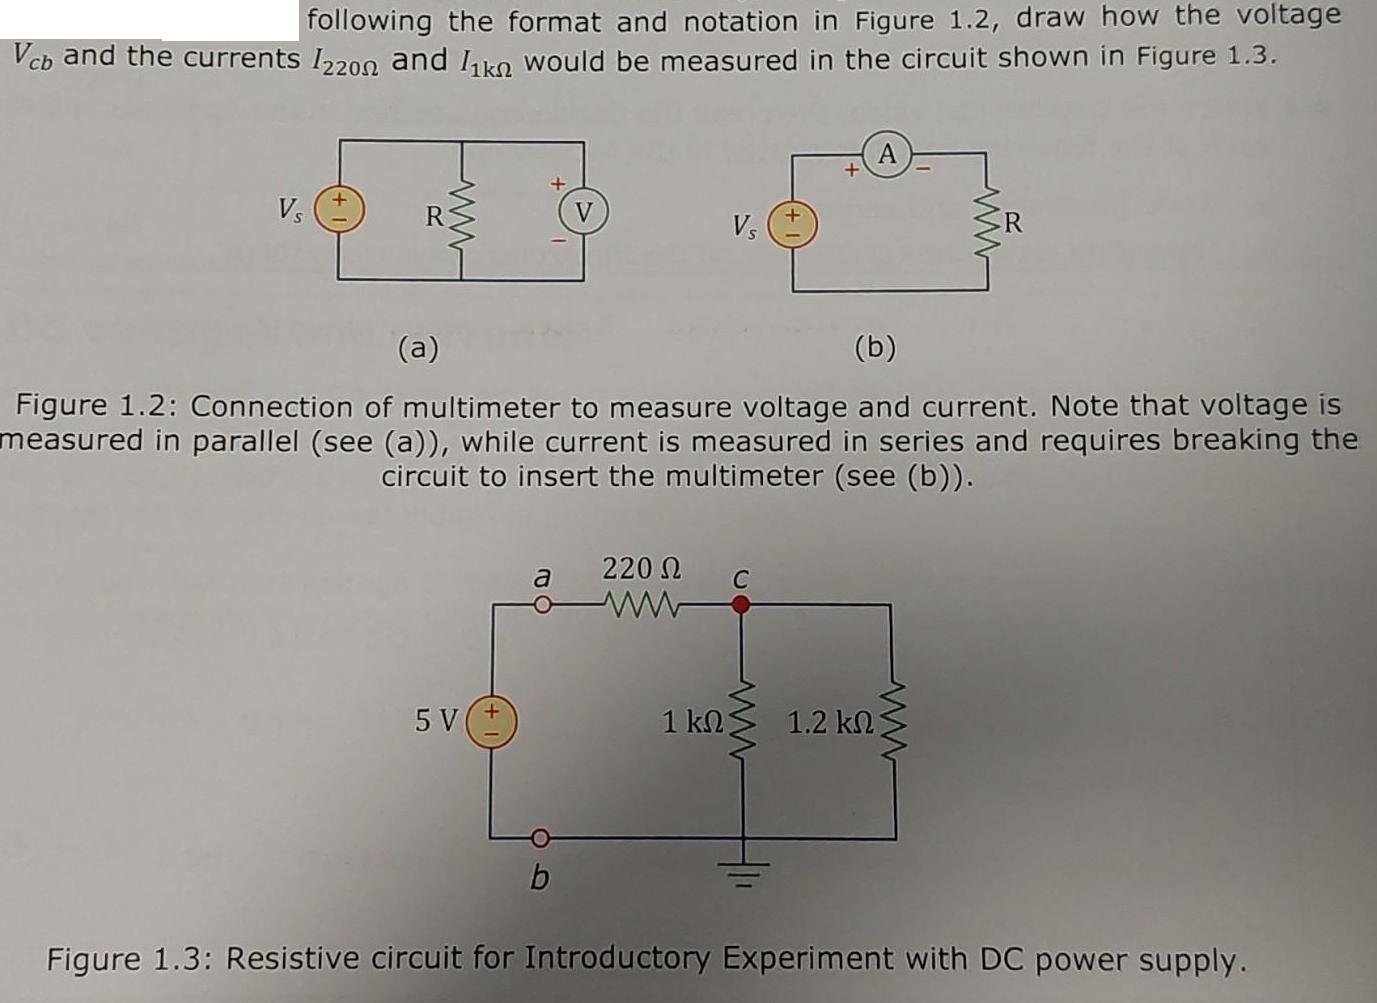 following the format and notation in Figure 1.2, draw how the voltage Vcb and the currents I200 and kn would